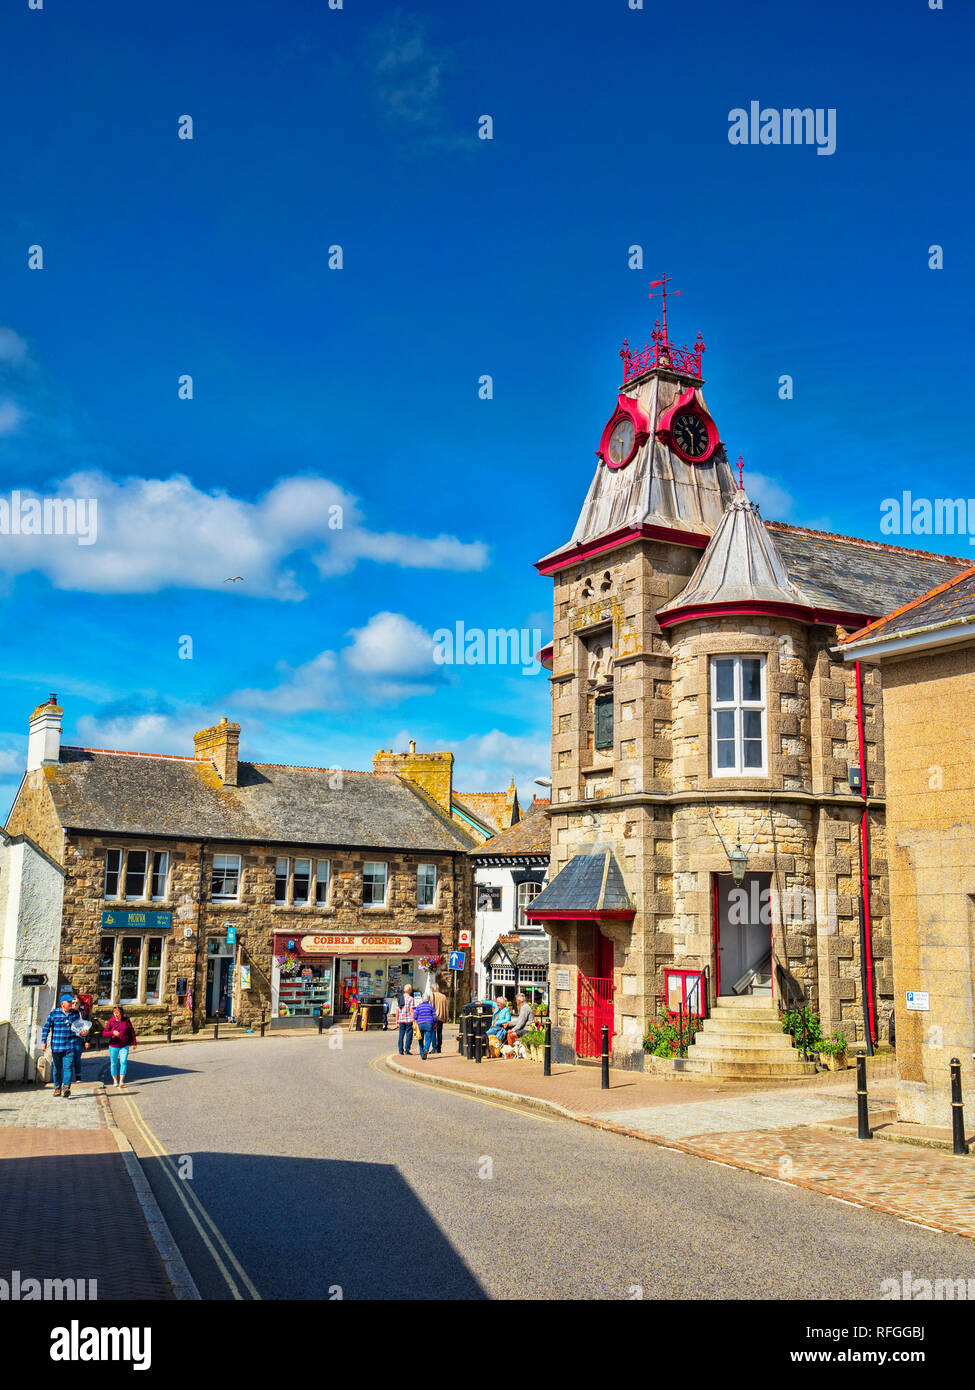 14 June 2018: Marazion, Cornwall, UK - The village centre in summer, with the Town Hall and its clock tower. Stock Photo